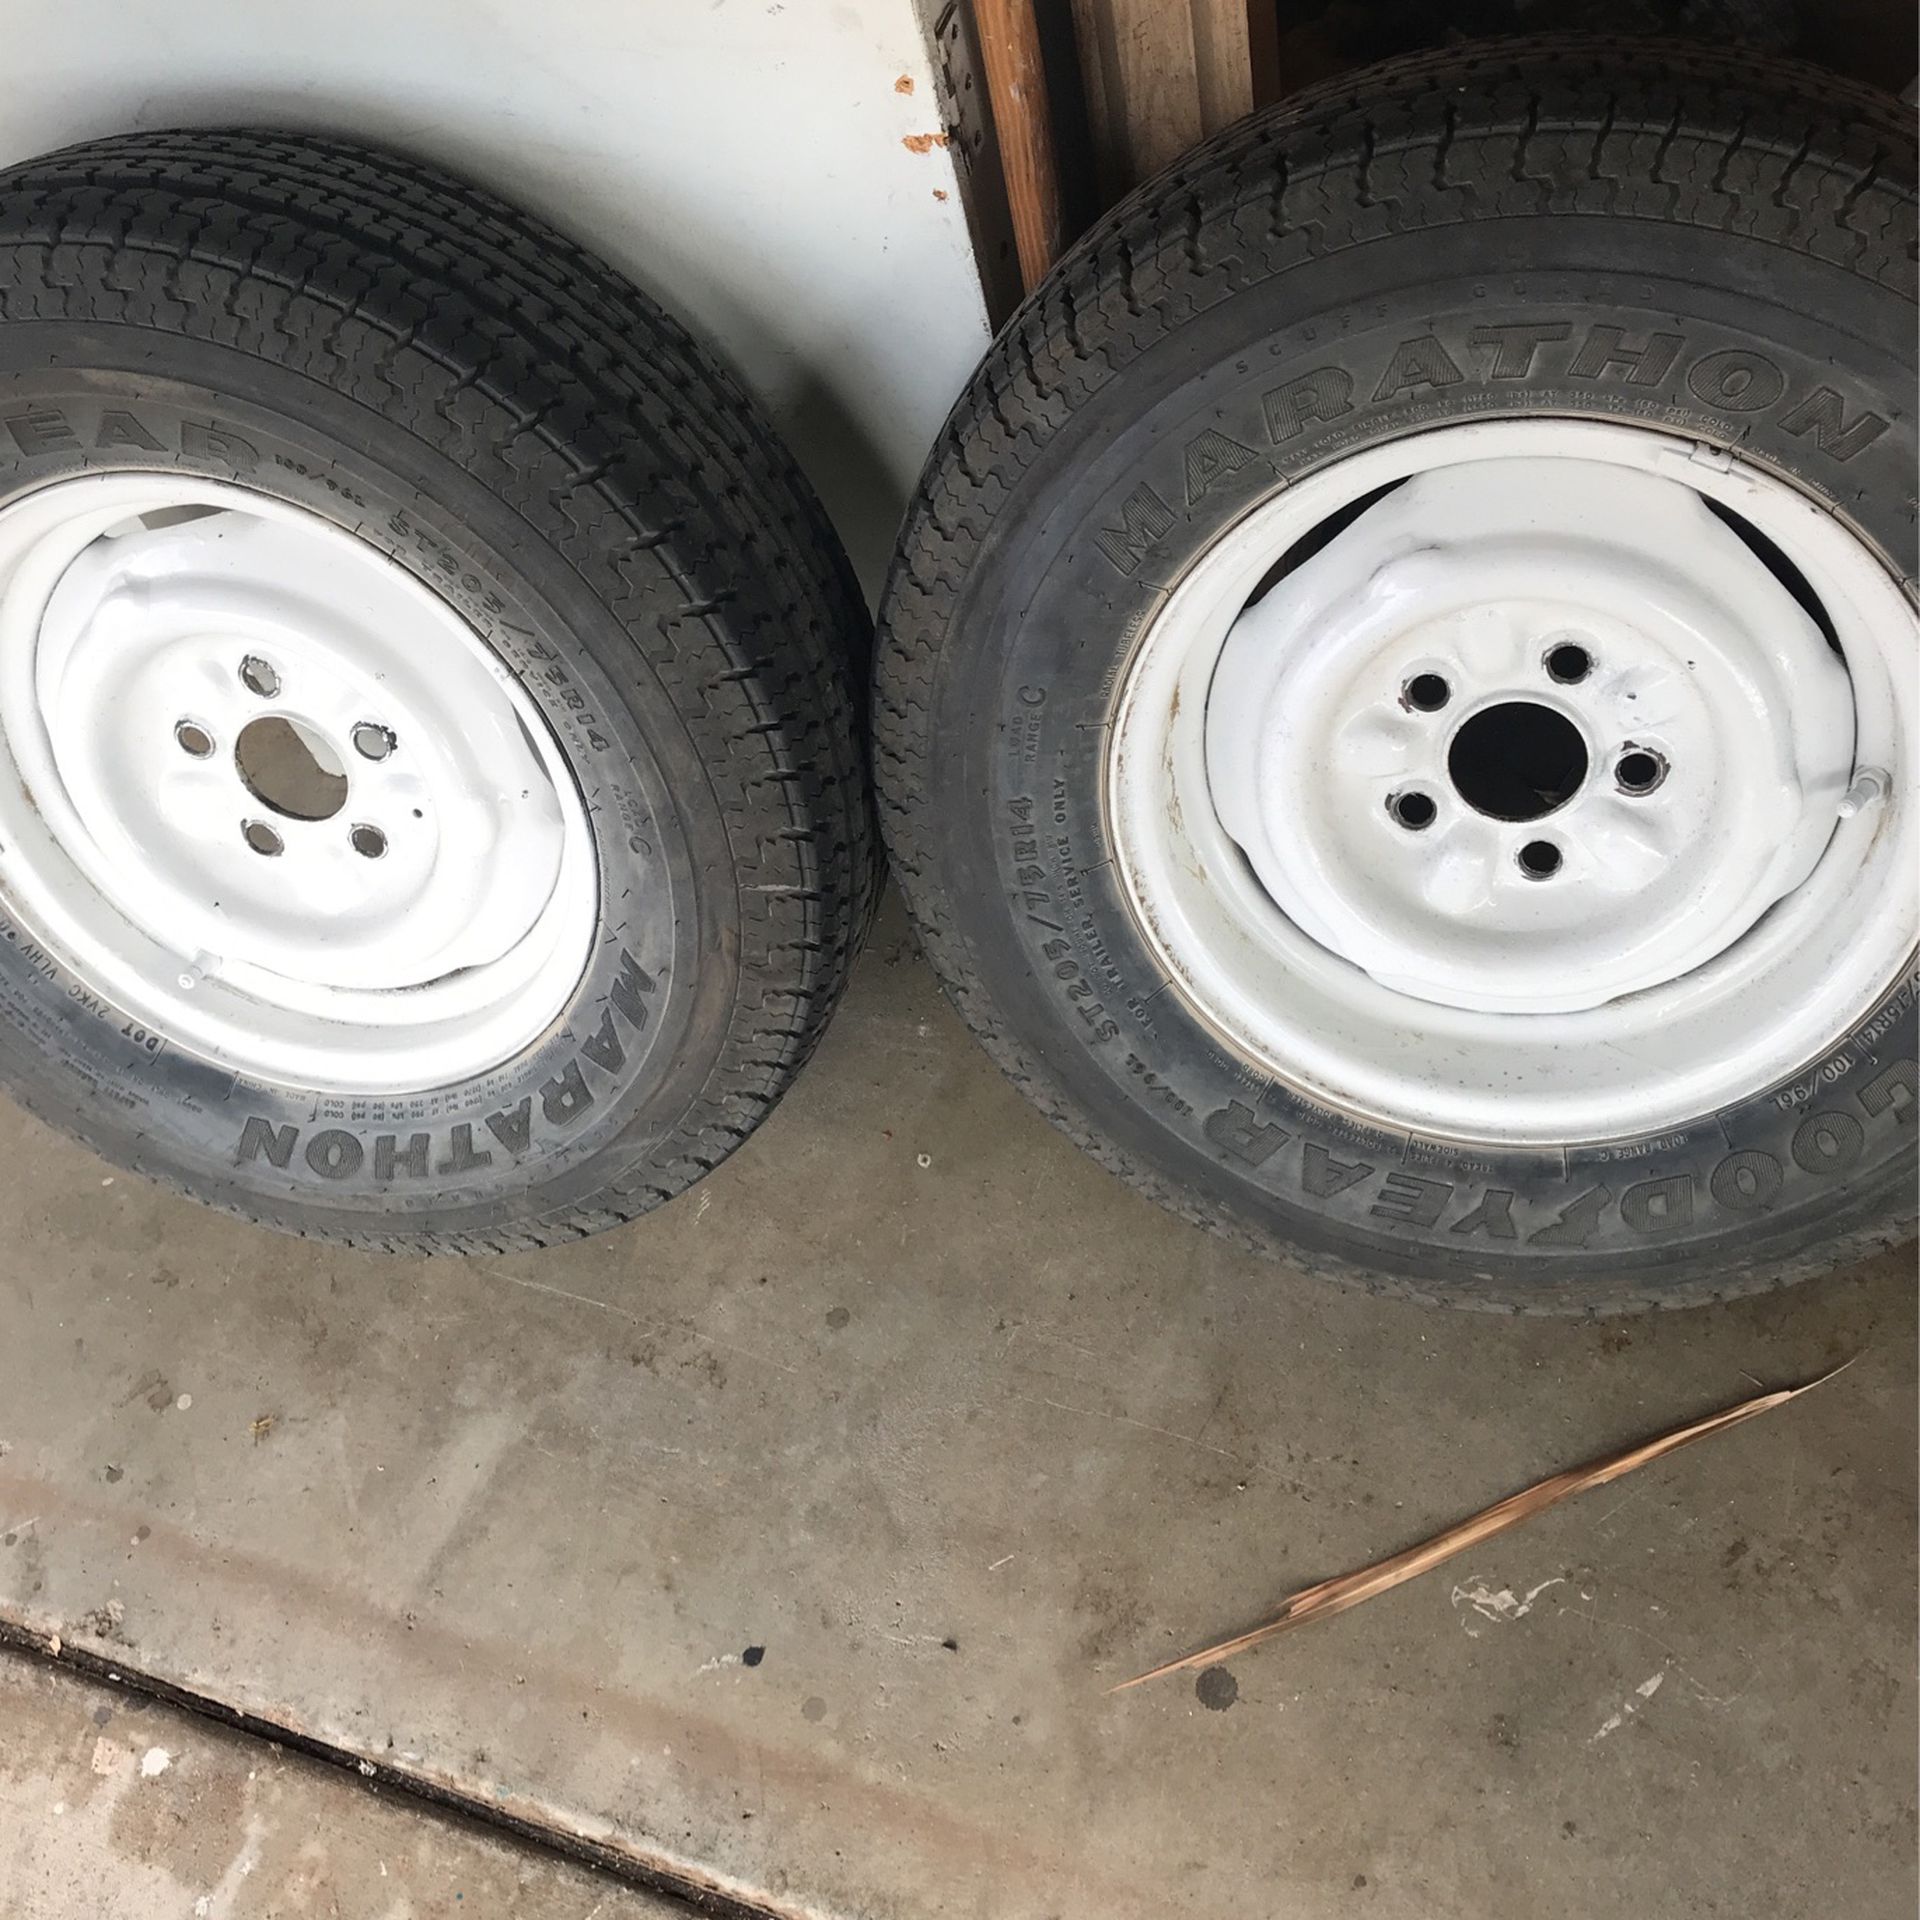 2 .14 Inch spare Tires For A Trailer